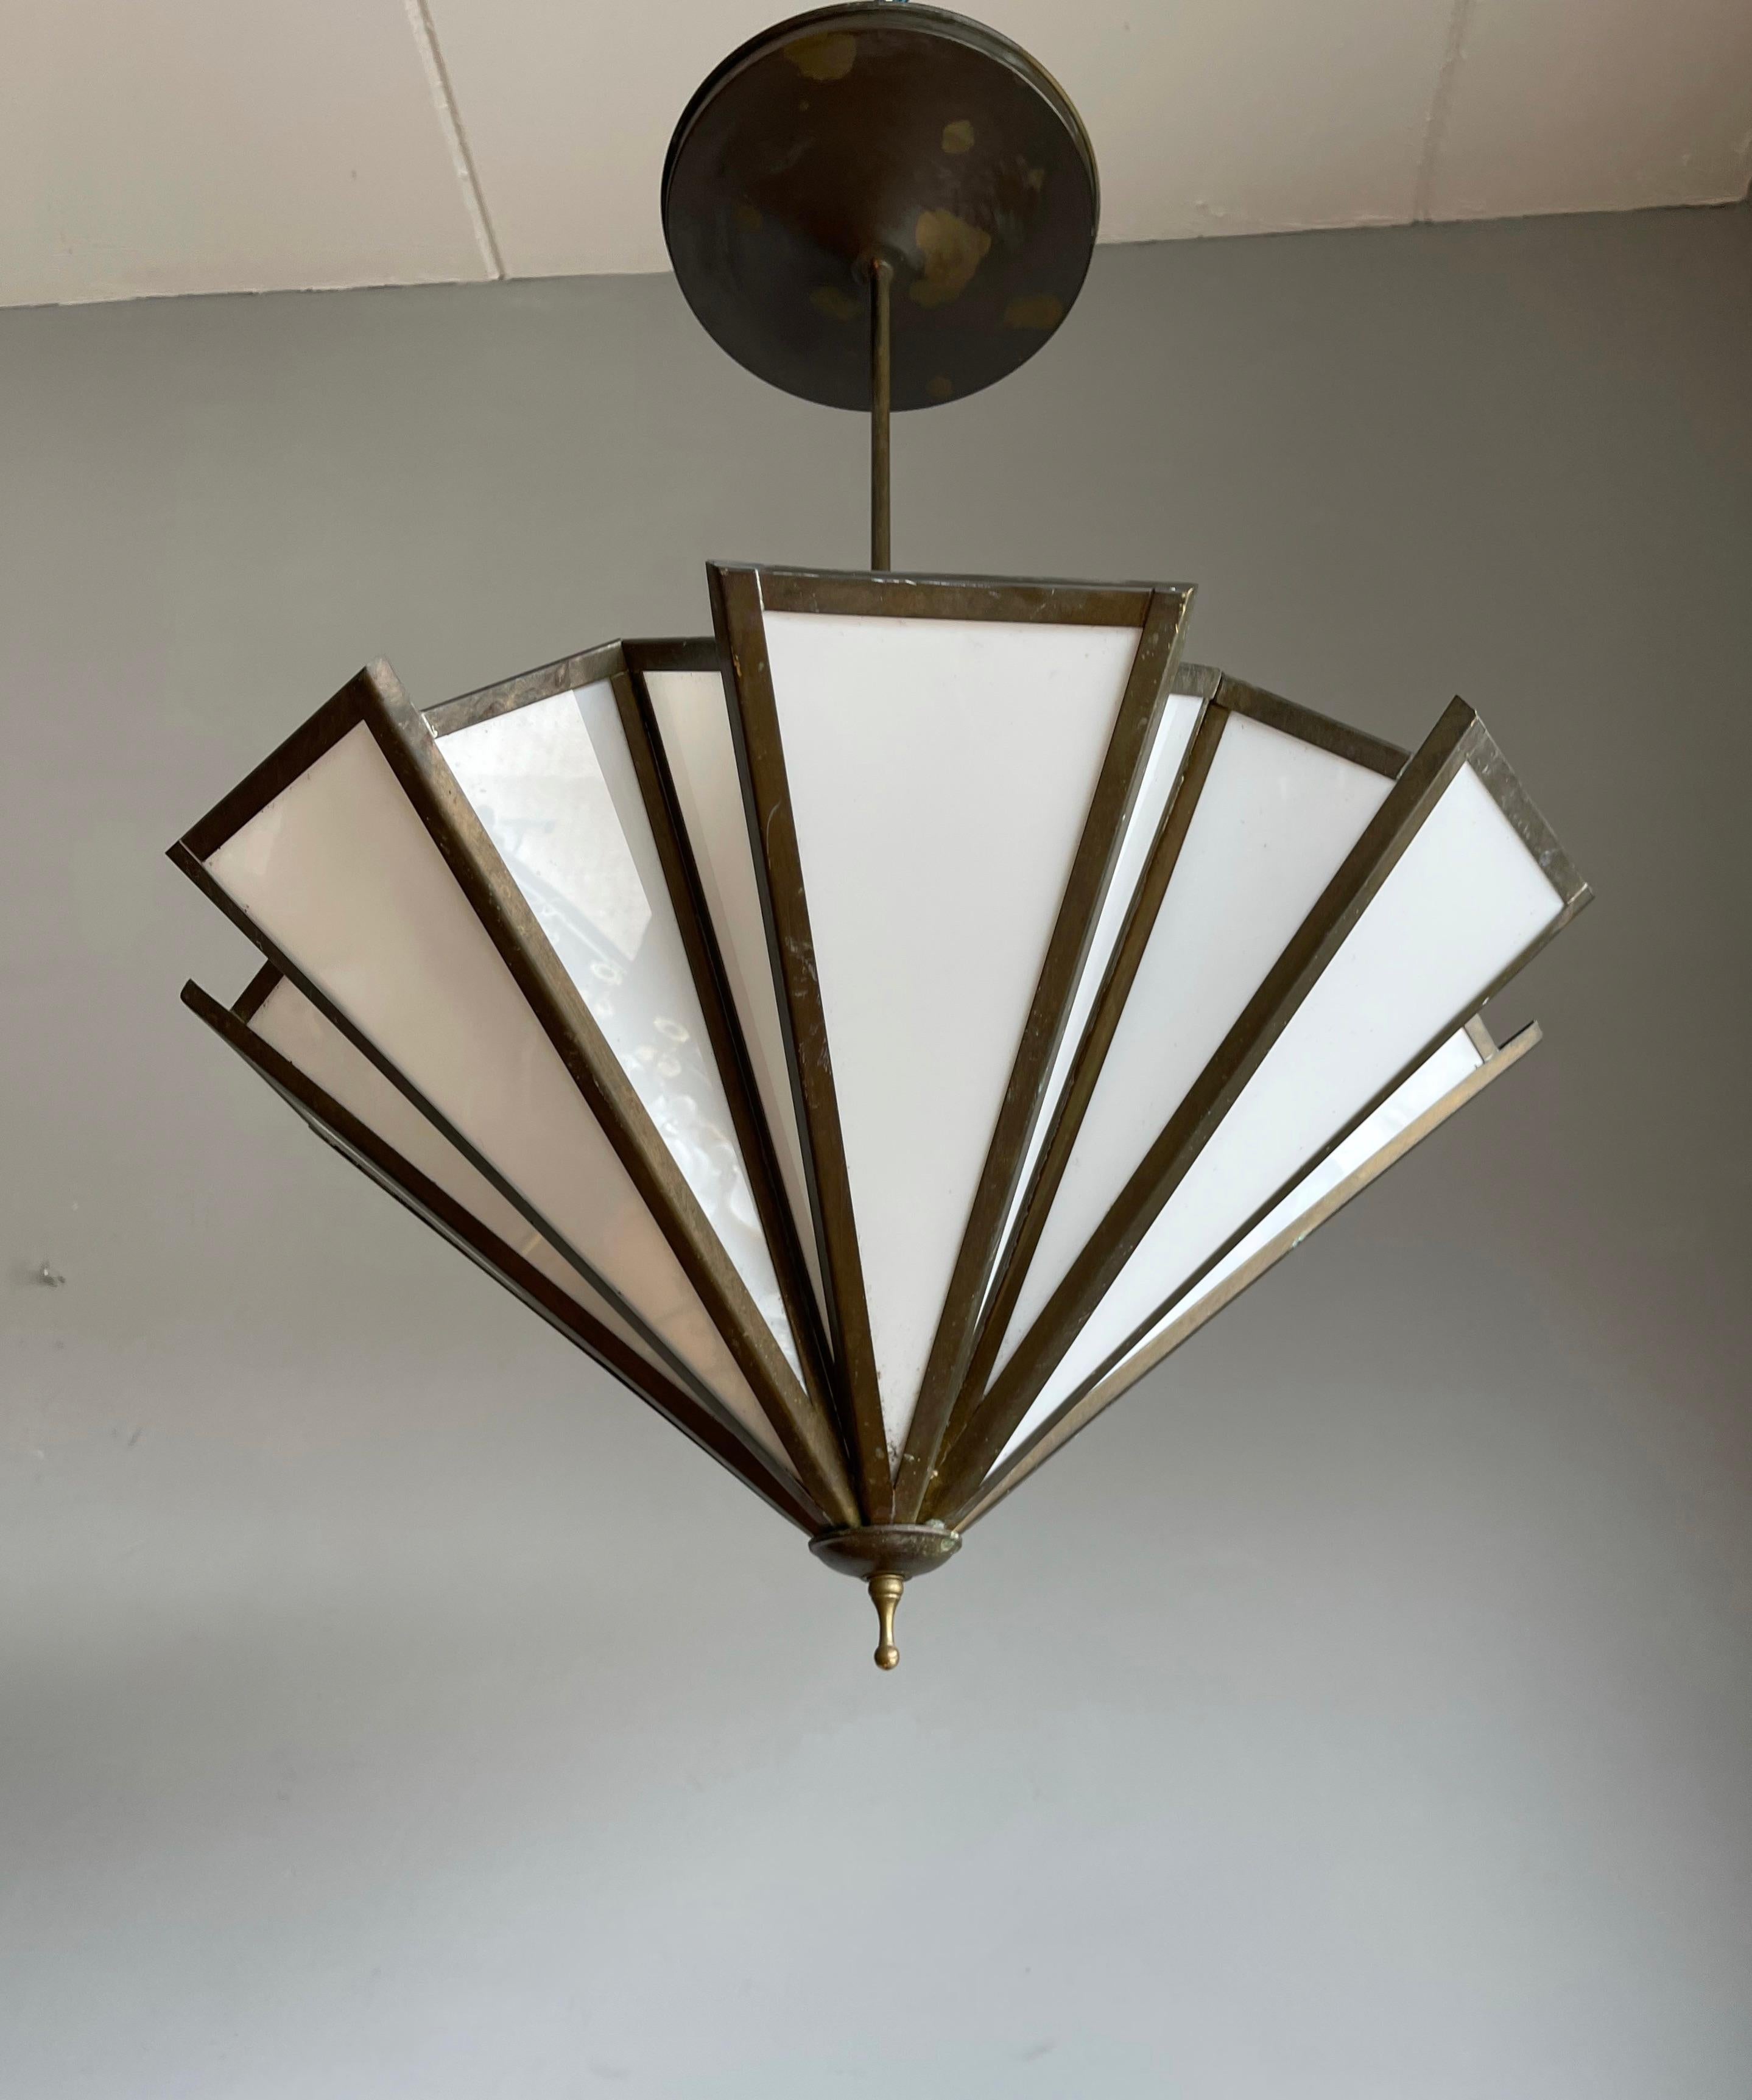 Unique and top quality made geometrical design, theater-style light fixtures.

The 1stdibs platform is known for offering the most beautiful things on earth and this timeless and stylish set of light fixtures undoubtedly fits that bill. The